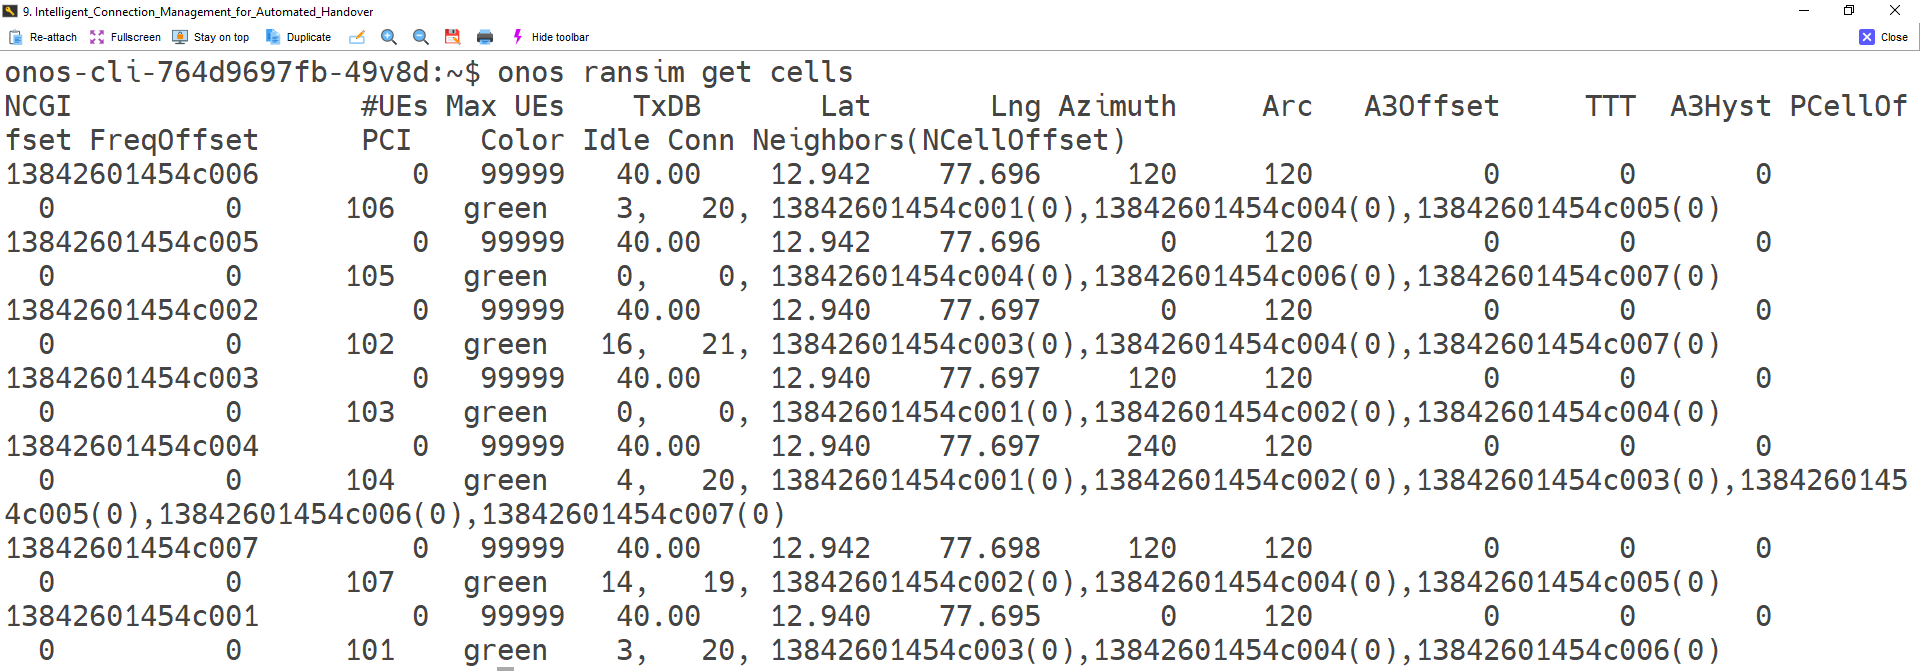 A console window showing the output of the command to view the cells.